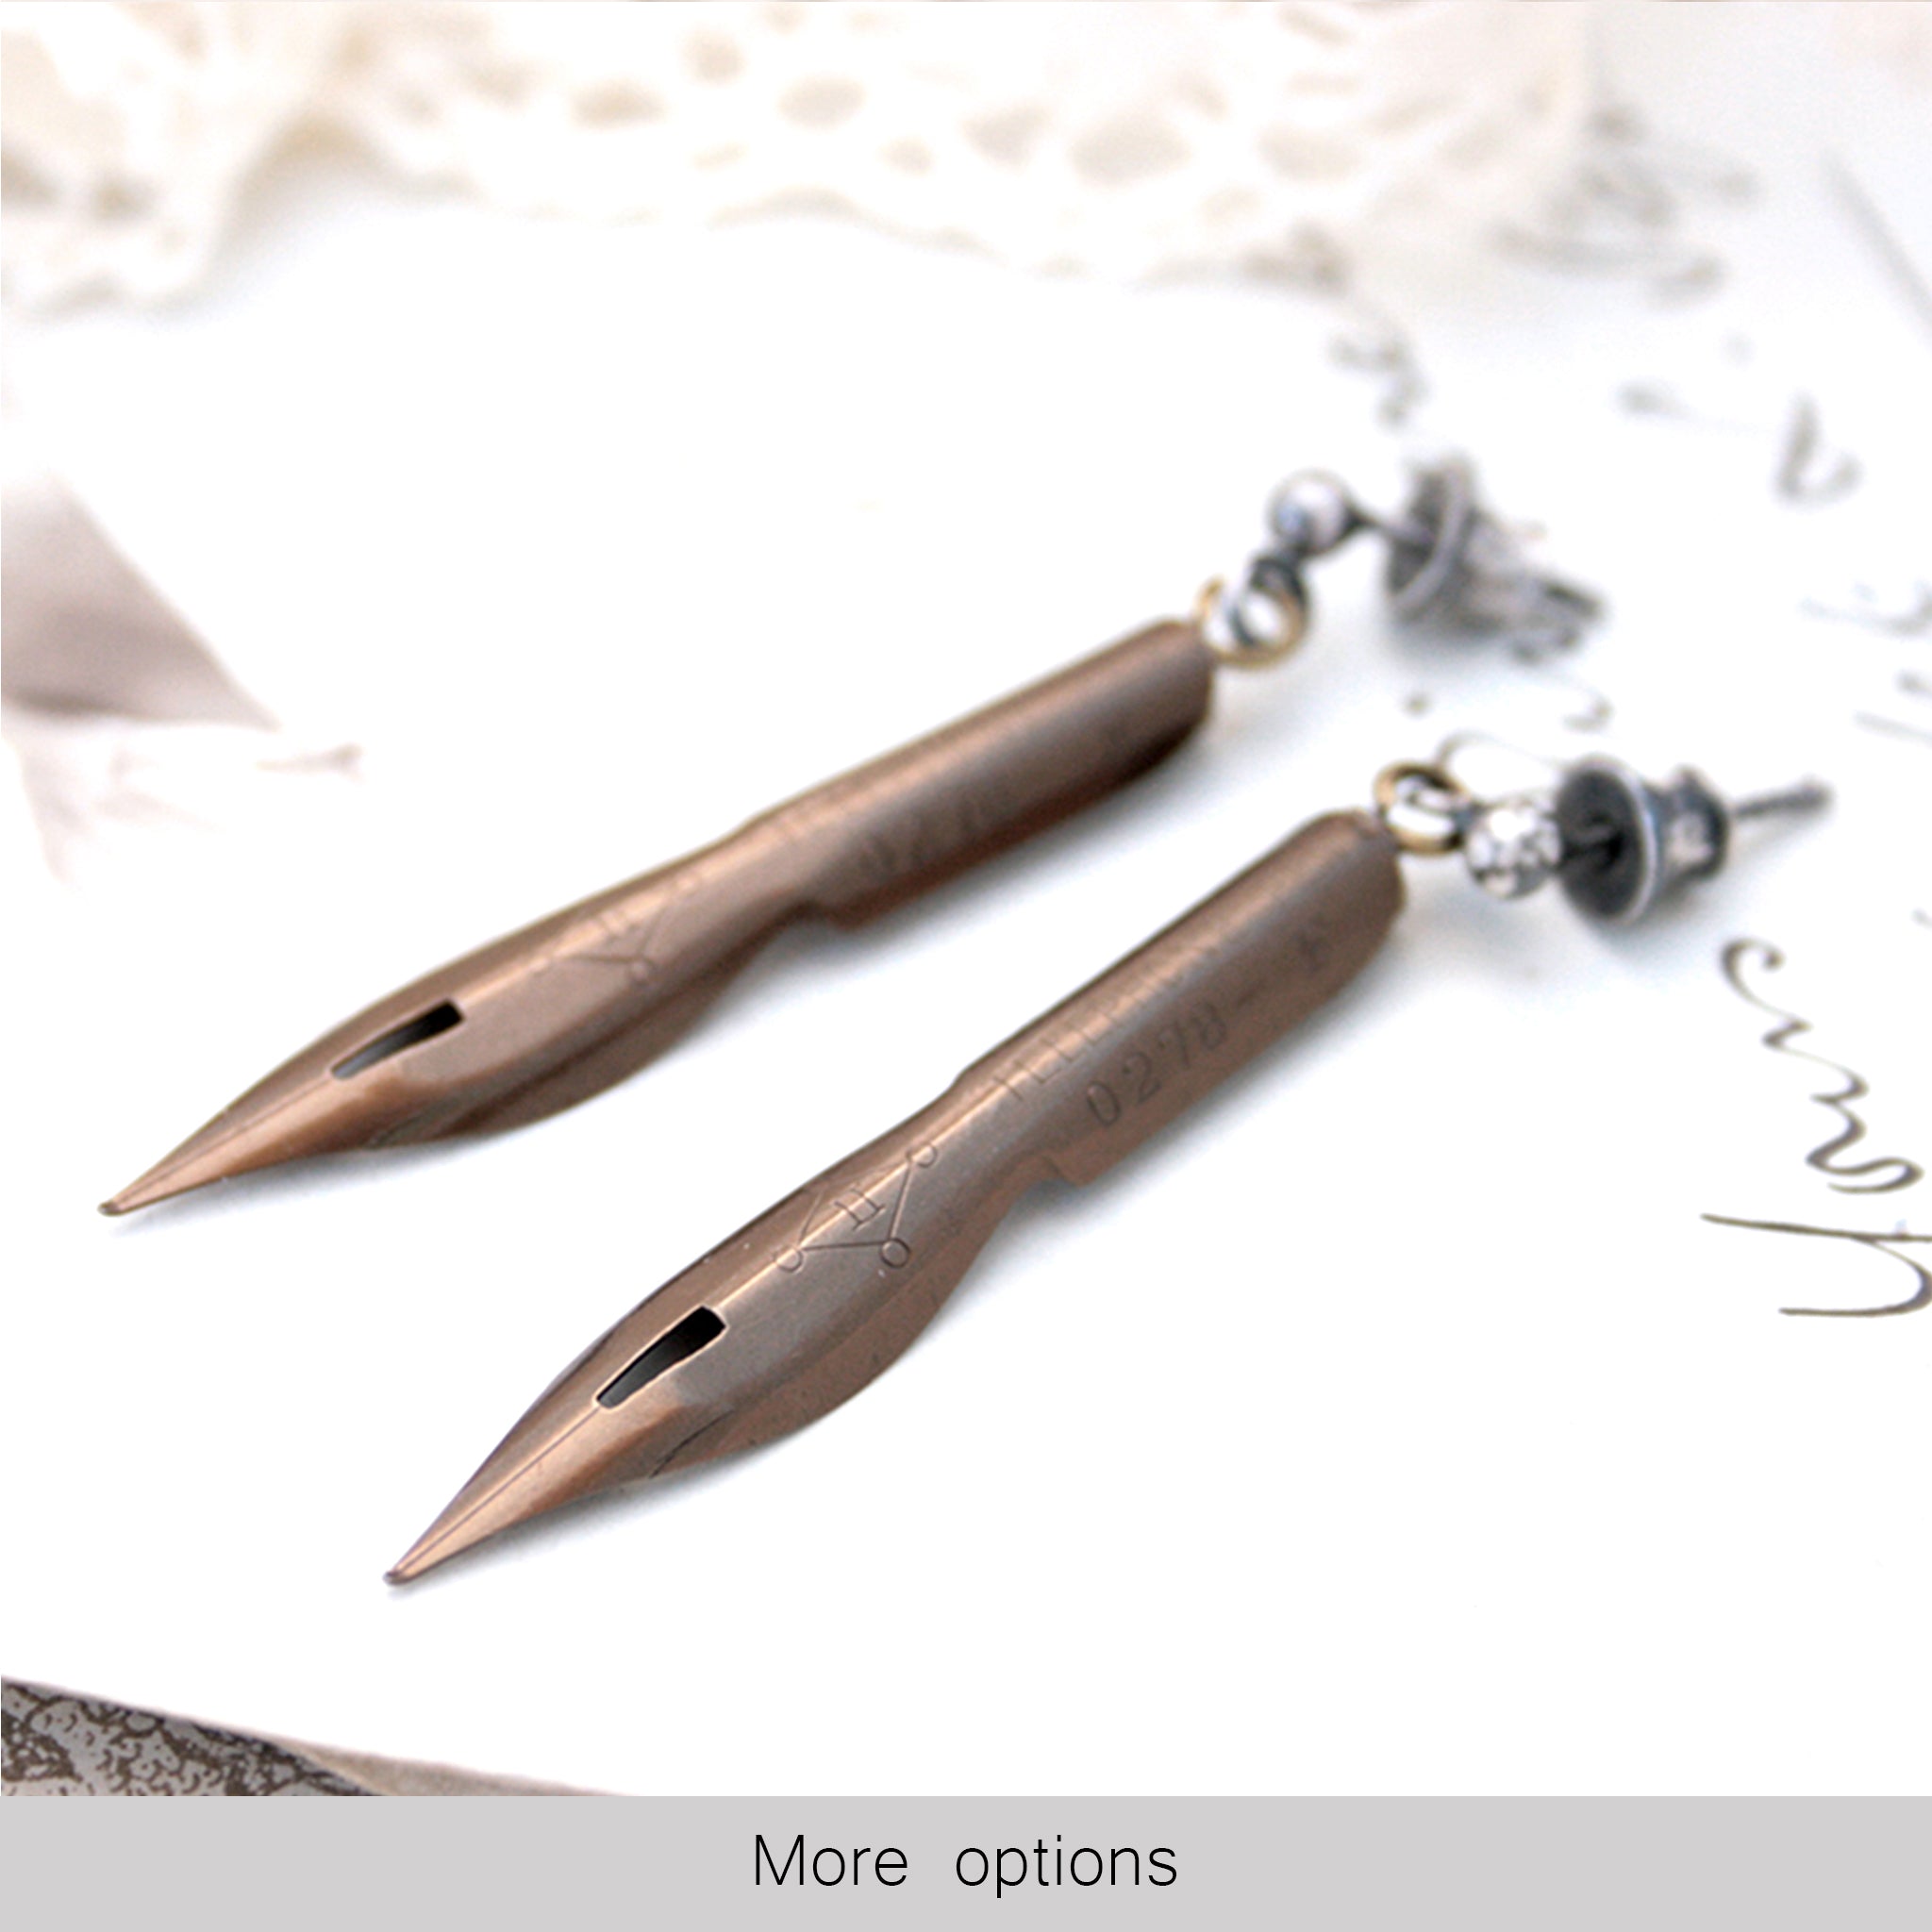 bronze earrings made of real pen nibs lying on an old photograph